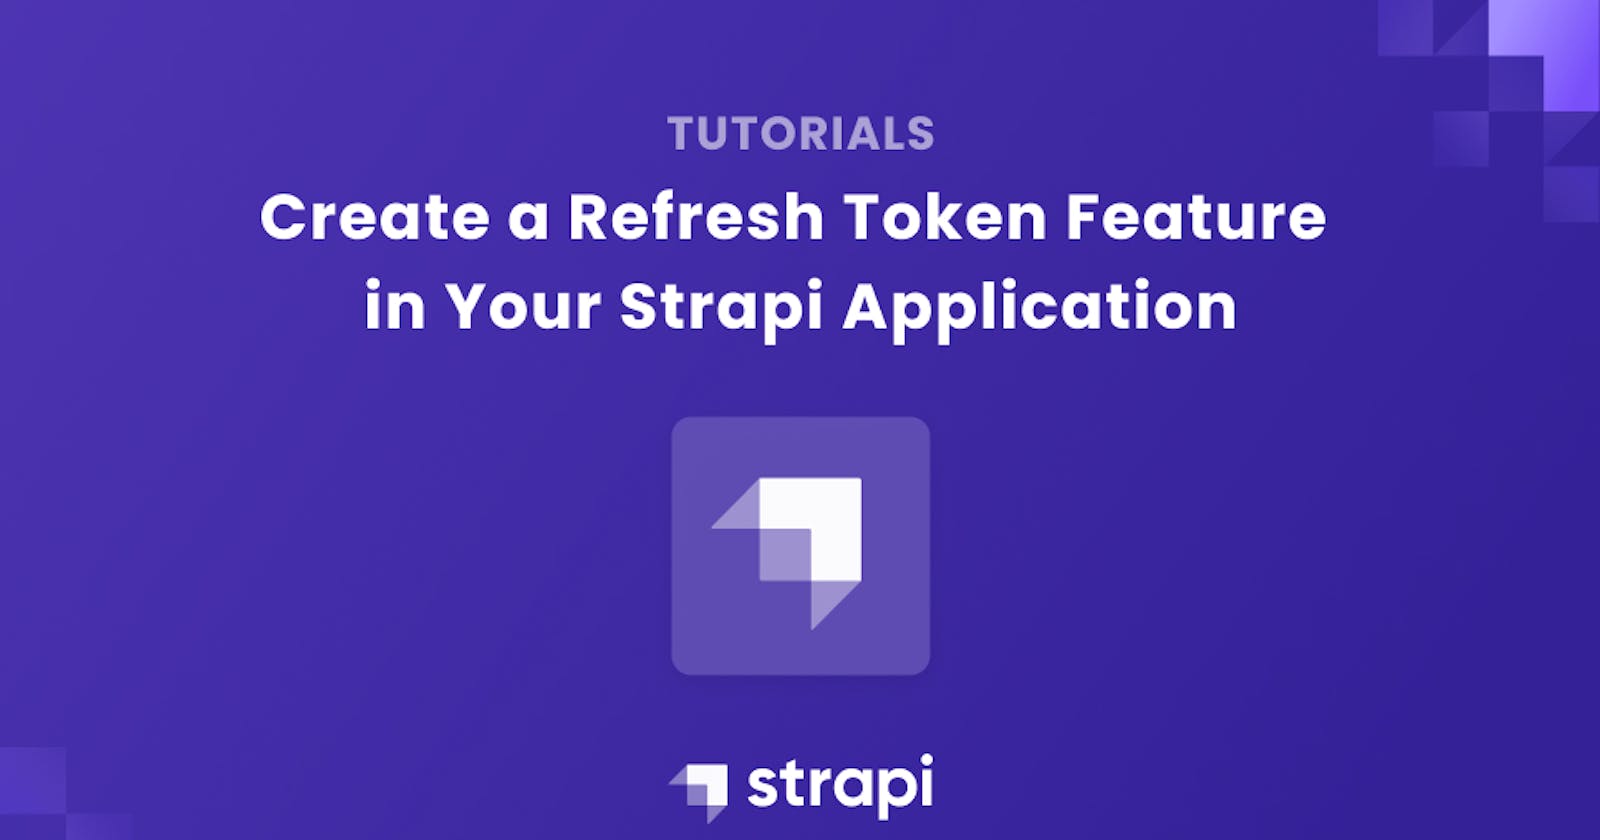 How to Create a Refresh Token Feature in your Strapi Application